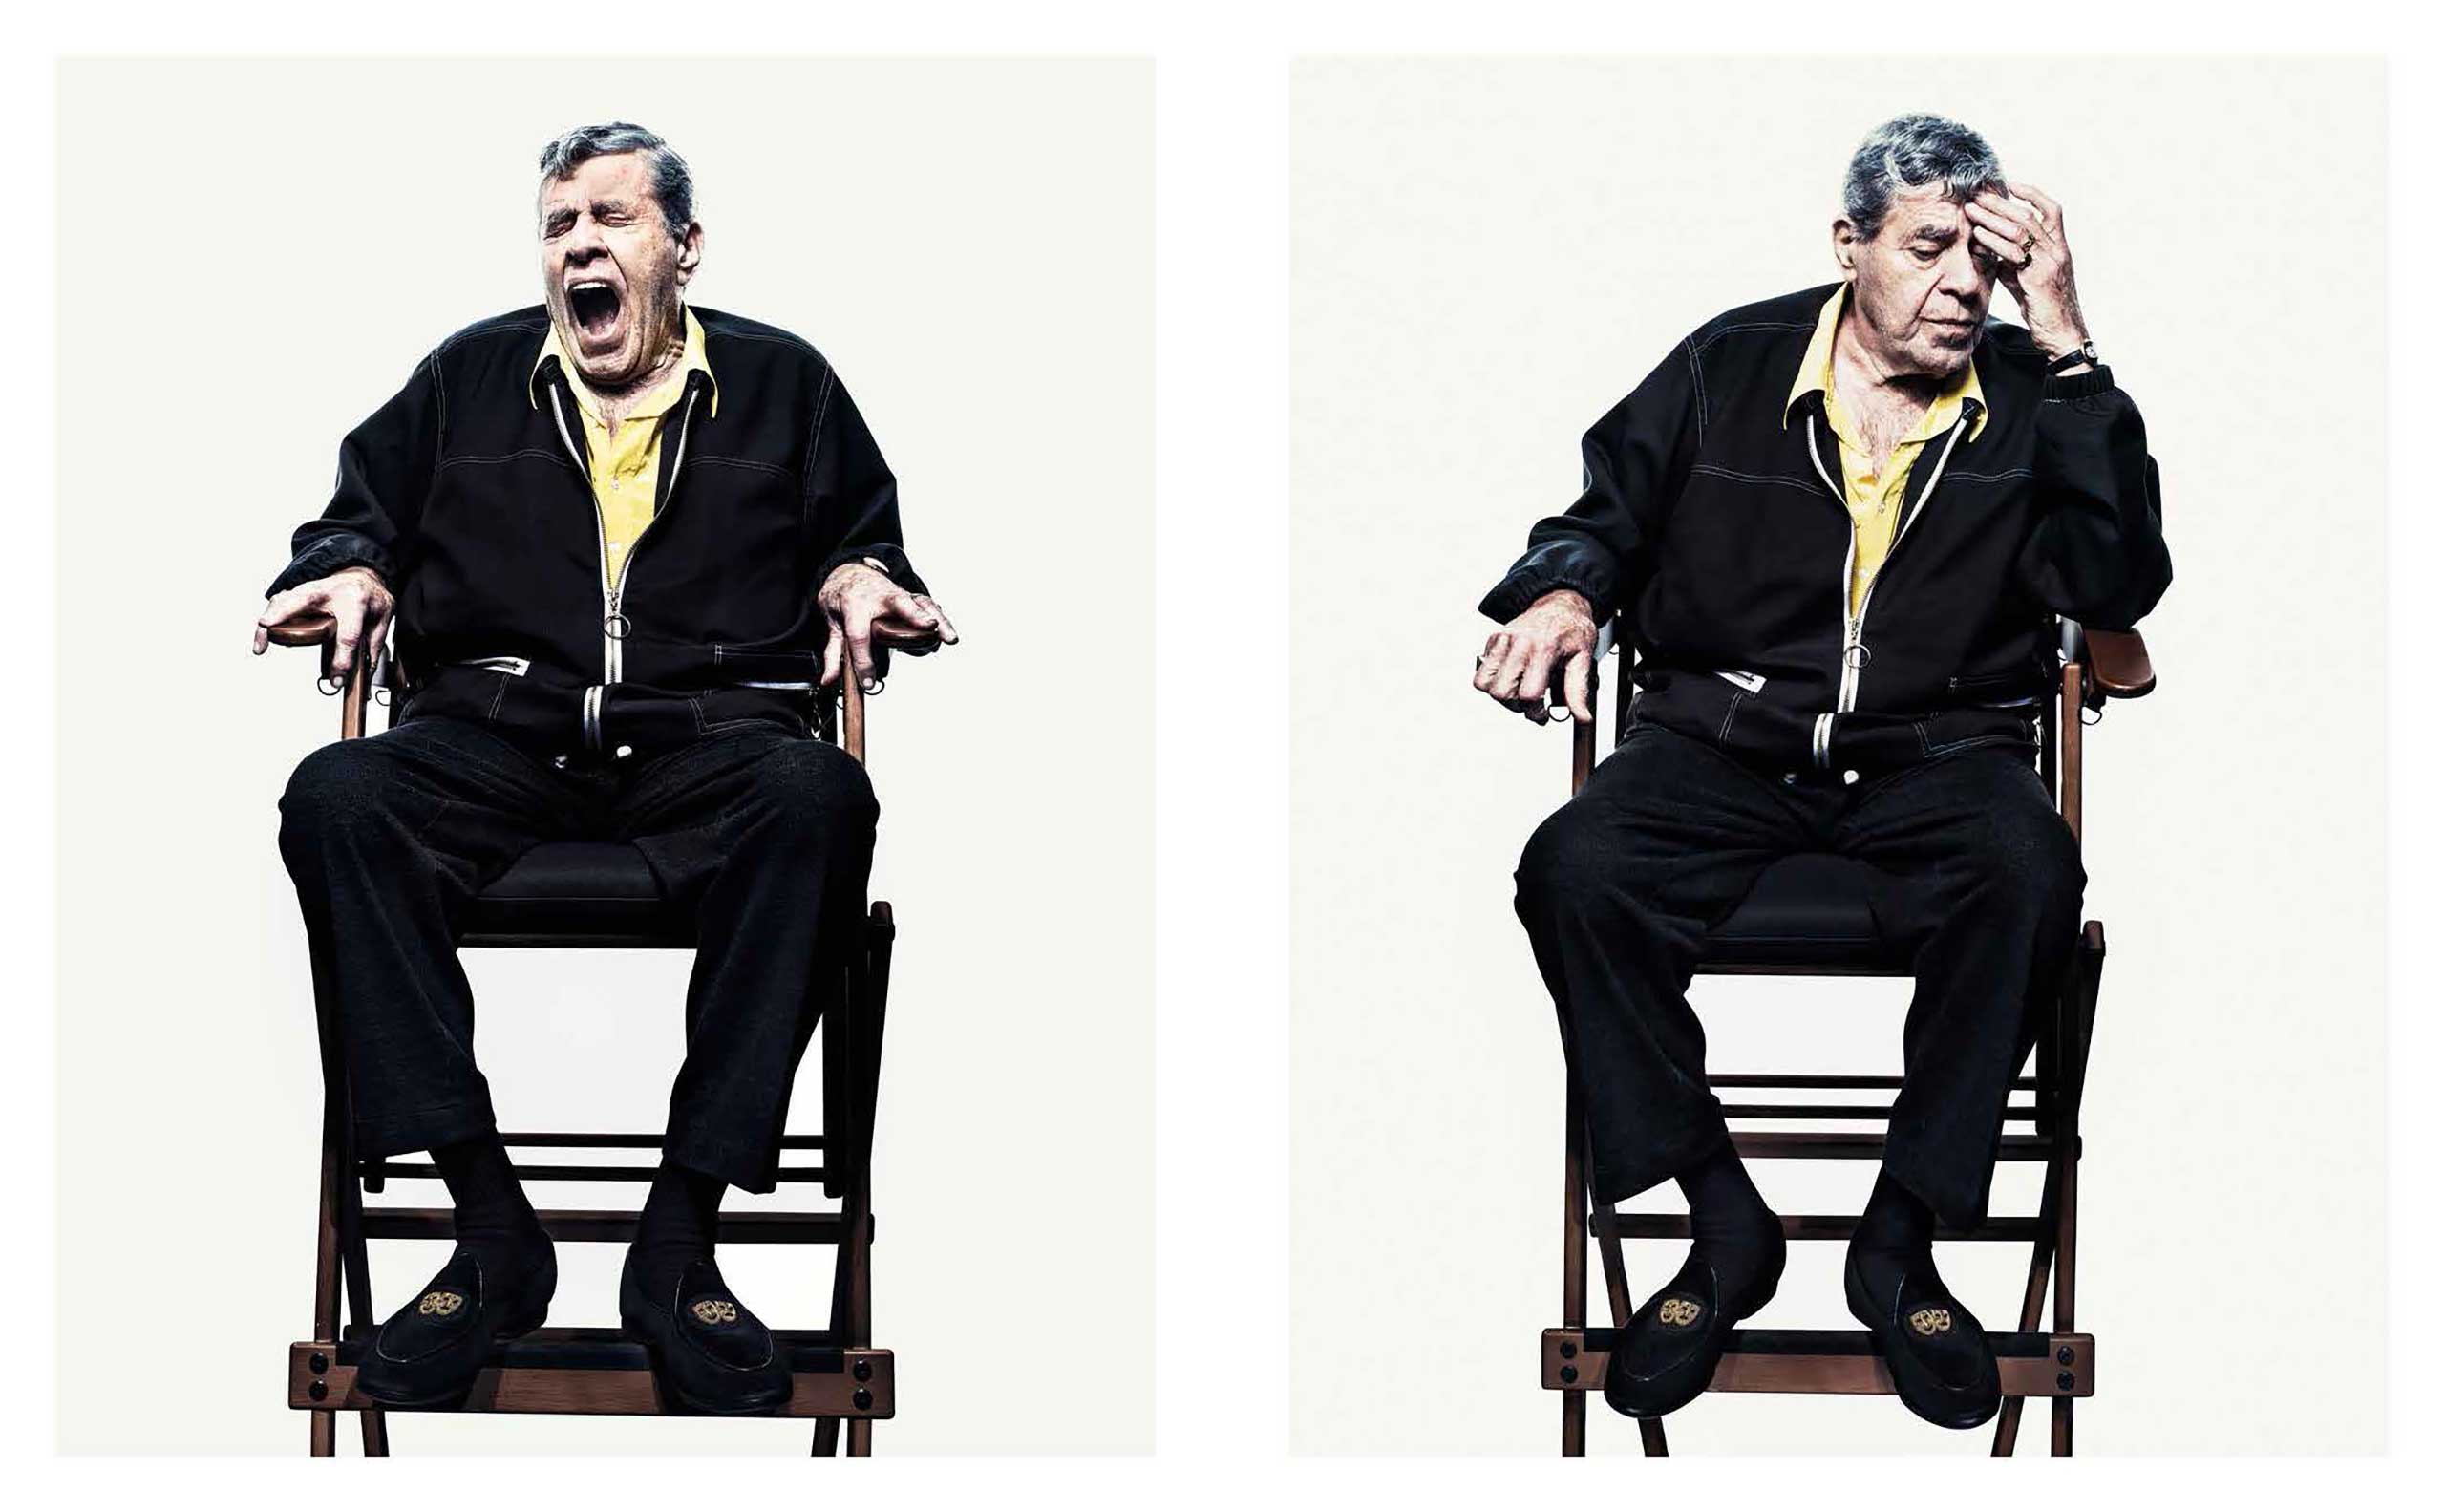 Jerry Lewis, Comedian and Actor, Nashville, Tennessee, 2013